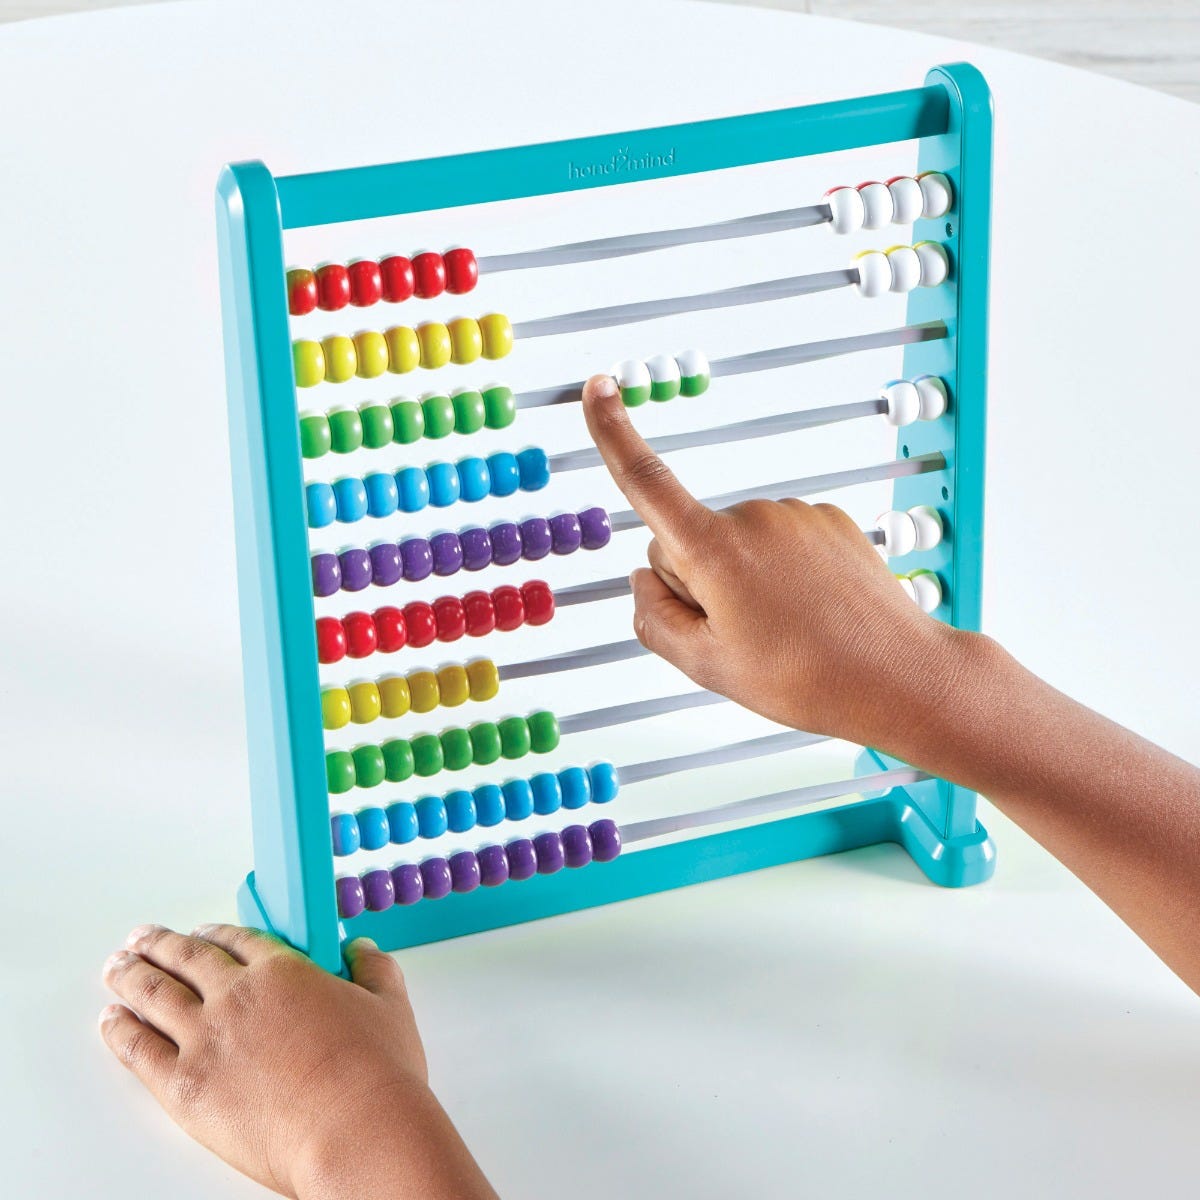 Colour Changing Abacus, Transform your child's learning experience with our one-of-a-kind Colour Changing Abacus! The Colour Changing Abacus is designed with multicoloured beads that magically change to white when slid across each rod, this unique educational tool is perfect for developing foundational maths skills. Colour Changing Abacus Features: Colour-Changing Beads: Each row of beads features its own distinct colour. As children slide the beads from one side to the other, they twist and change to white